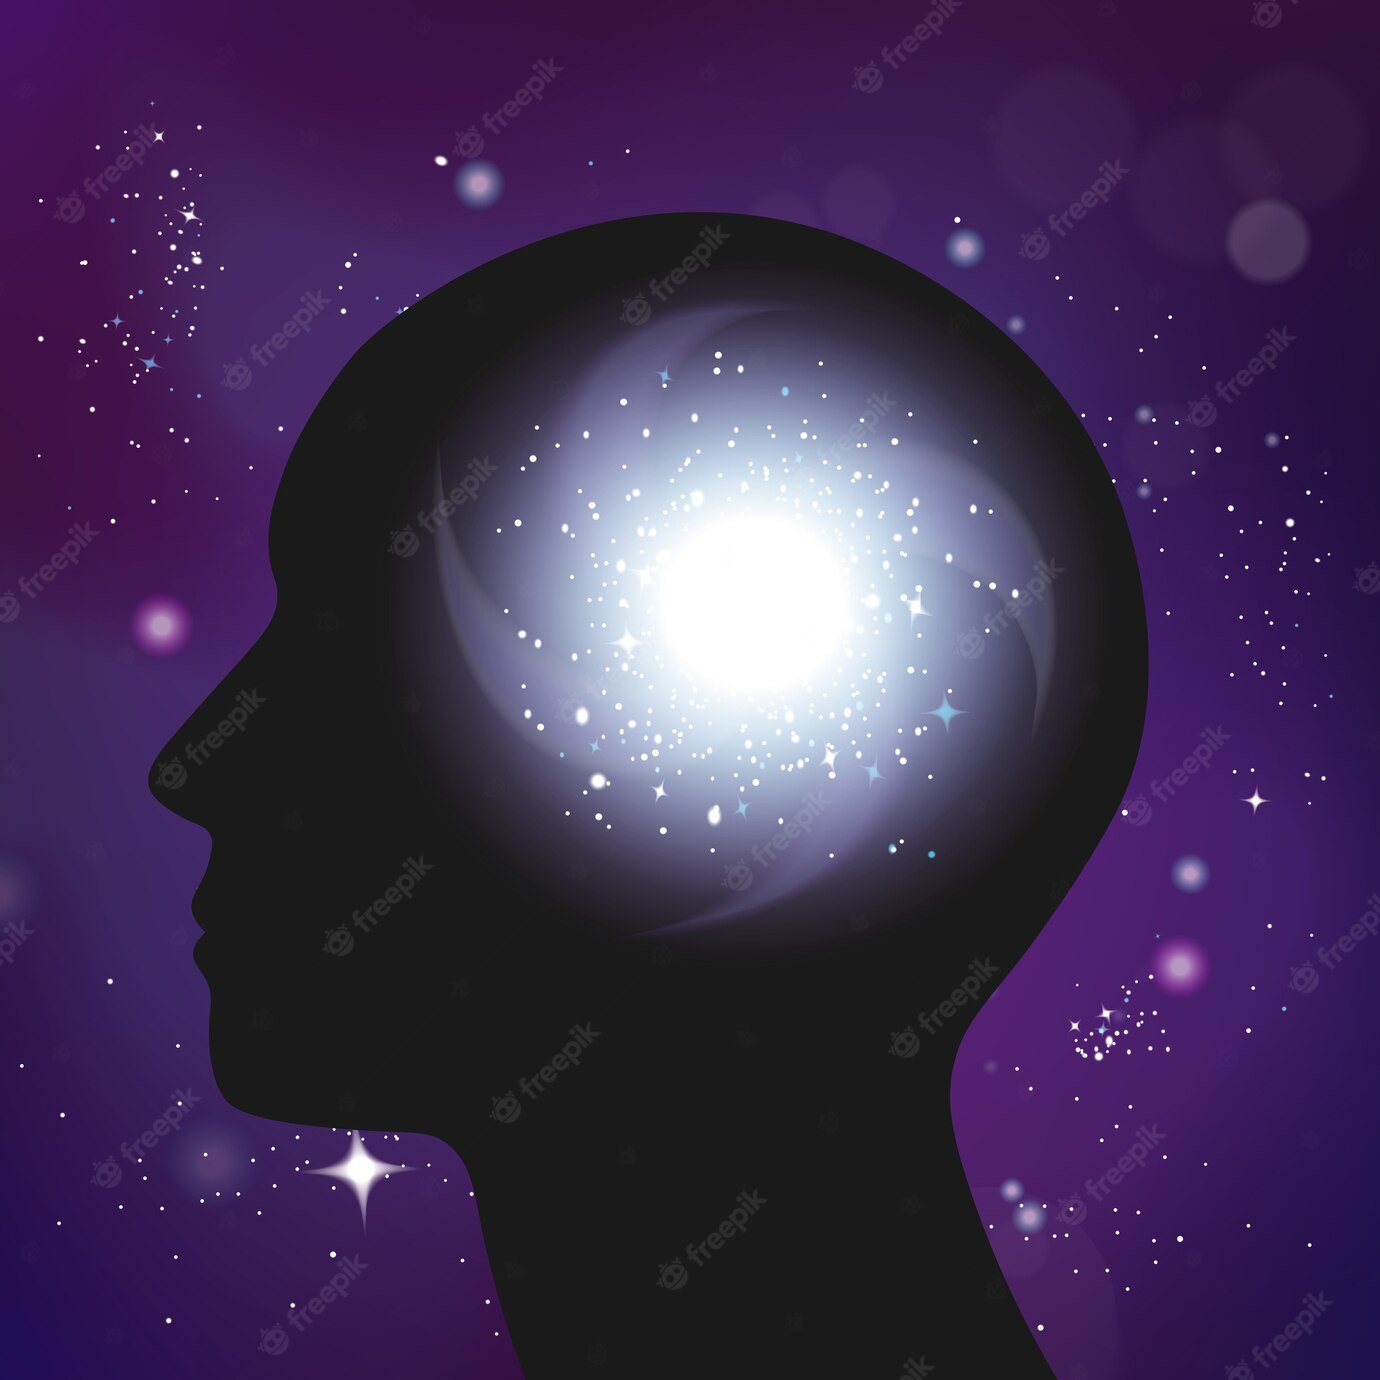 Galaxy Psychology Concept Realistic Composition 98292 7856